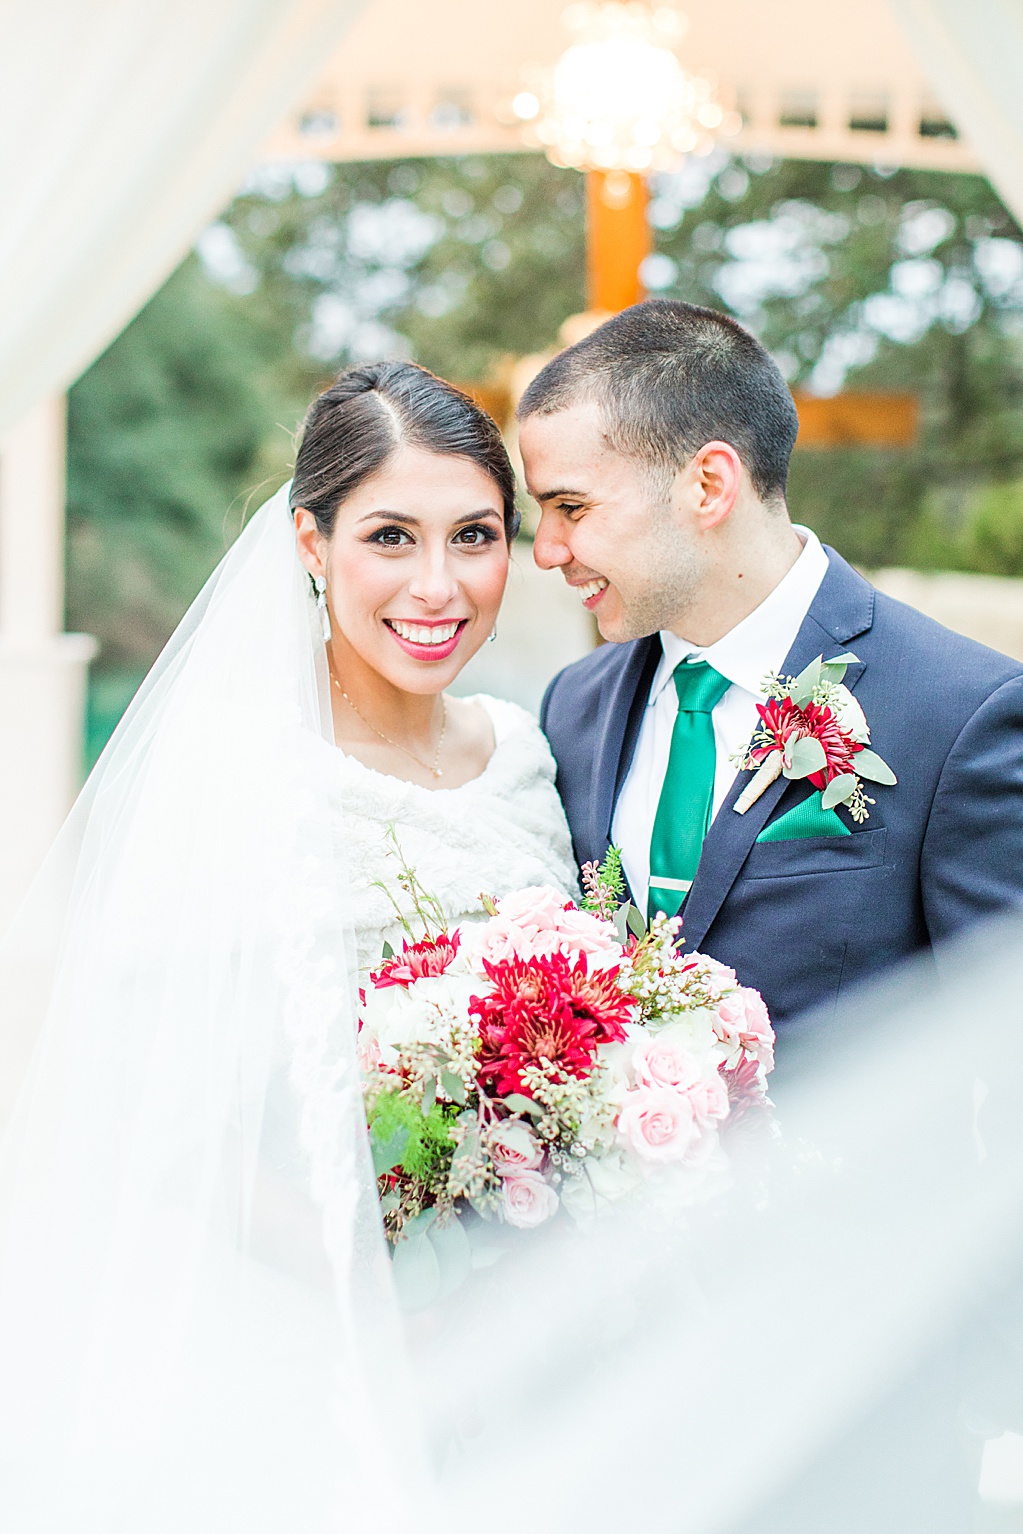 Winter Wedding at Kendall Plantation Hill Country Wedding Venue by Allison Jeffers Photography 0108